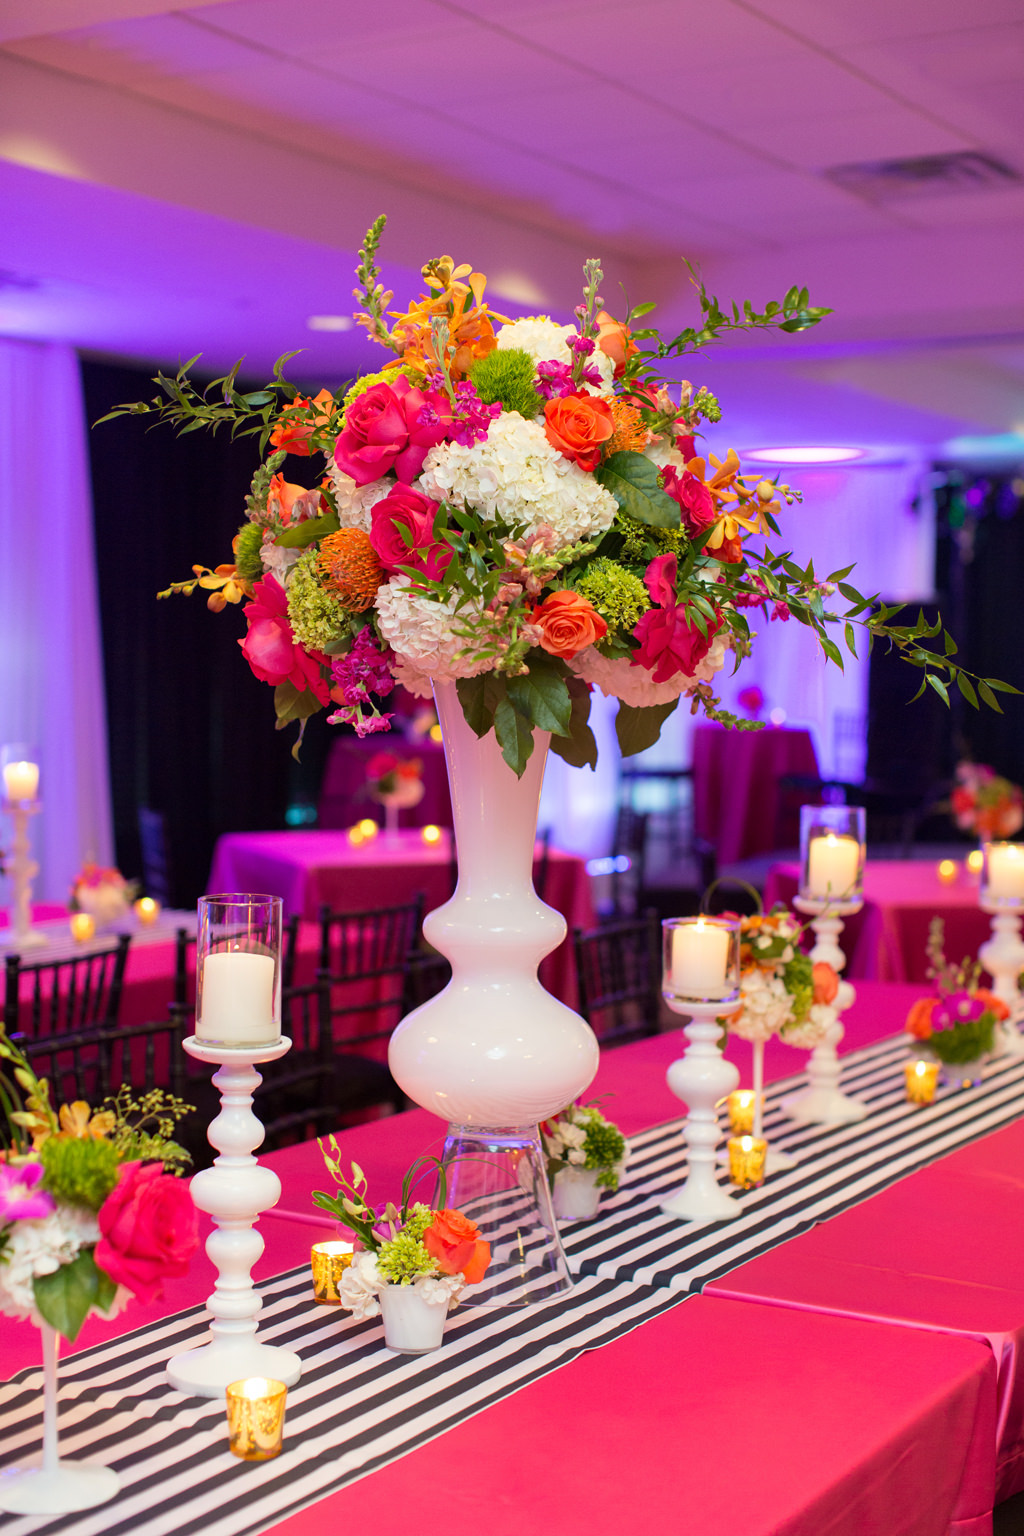 Whimsical Kate Spade Inspired Wedding Reception Decor, Long Table with Hot Pink Tablecloth, Black and White Stripe Table Runner, Tall White Vase with Colorful Pink, Orange, Yellow, White and Green Flower Centerpiece, White Candlesticks | Tampa Bay Wedding Planner Parties A La Carte